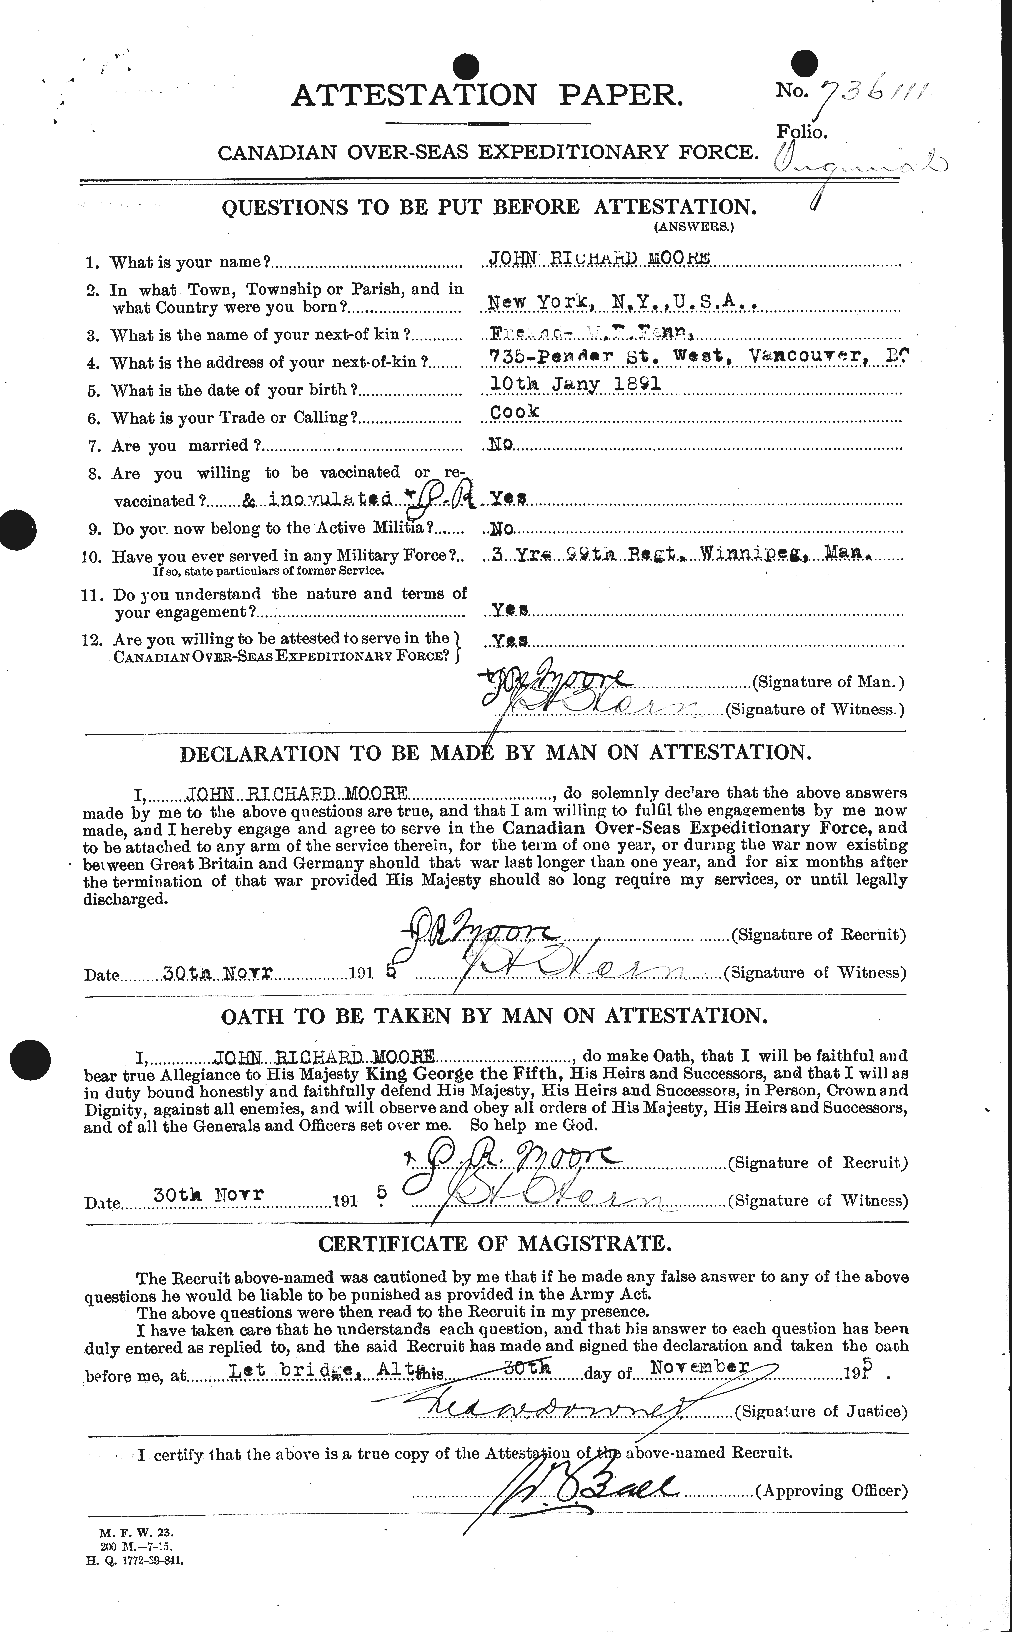 Personnel Records of the First World War - CEF 503327a